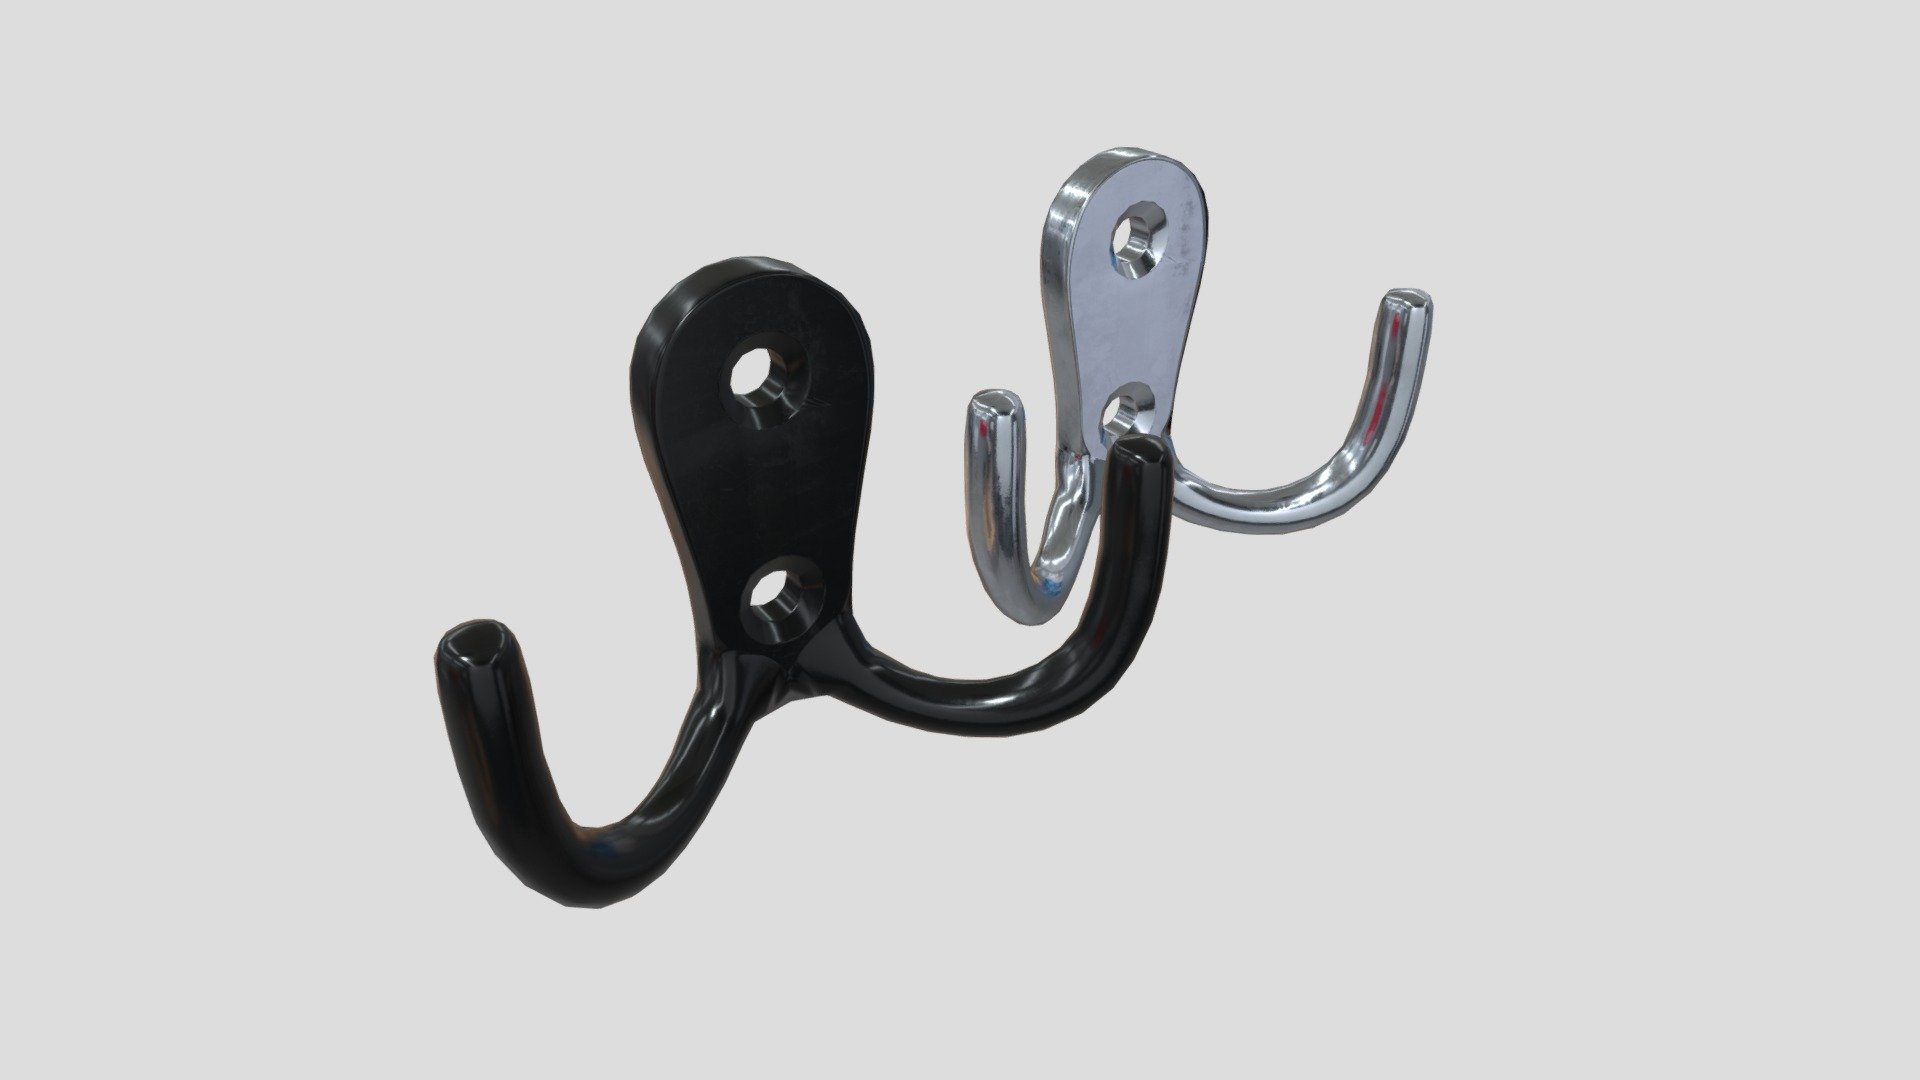 ‘Two sides of the same hook on the wall!’

● 4096 x 4096 PBR textures

● normal map is baked from the high poly model

Please do not hesitate to contact with me. I will be happy to help you.

Contact: plaggy.net@gmail.com

Formats: .fbx, .dae, .max, .obj, .mtl, .png, .glTF, .USDZ Polygon: 1292 Vertices: 1302 Textures: Yes, PBR (ao, albedo, metal, normal, ORM, rough) Materials: Yes UV Mapped: Yes Unwrapped UVs: Yes (non overlapping) - Coat Hook 2 - Buy Royalty Free 3D model by plaggy 3d model